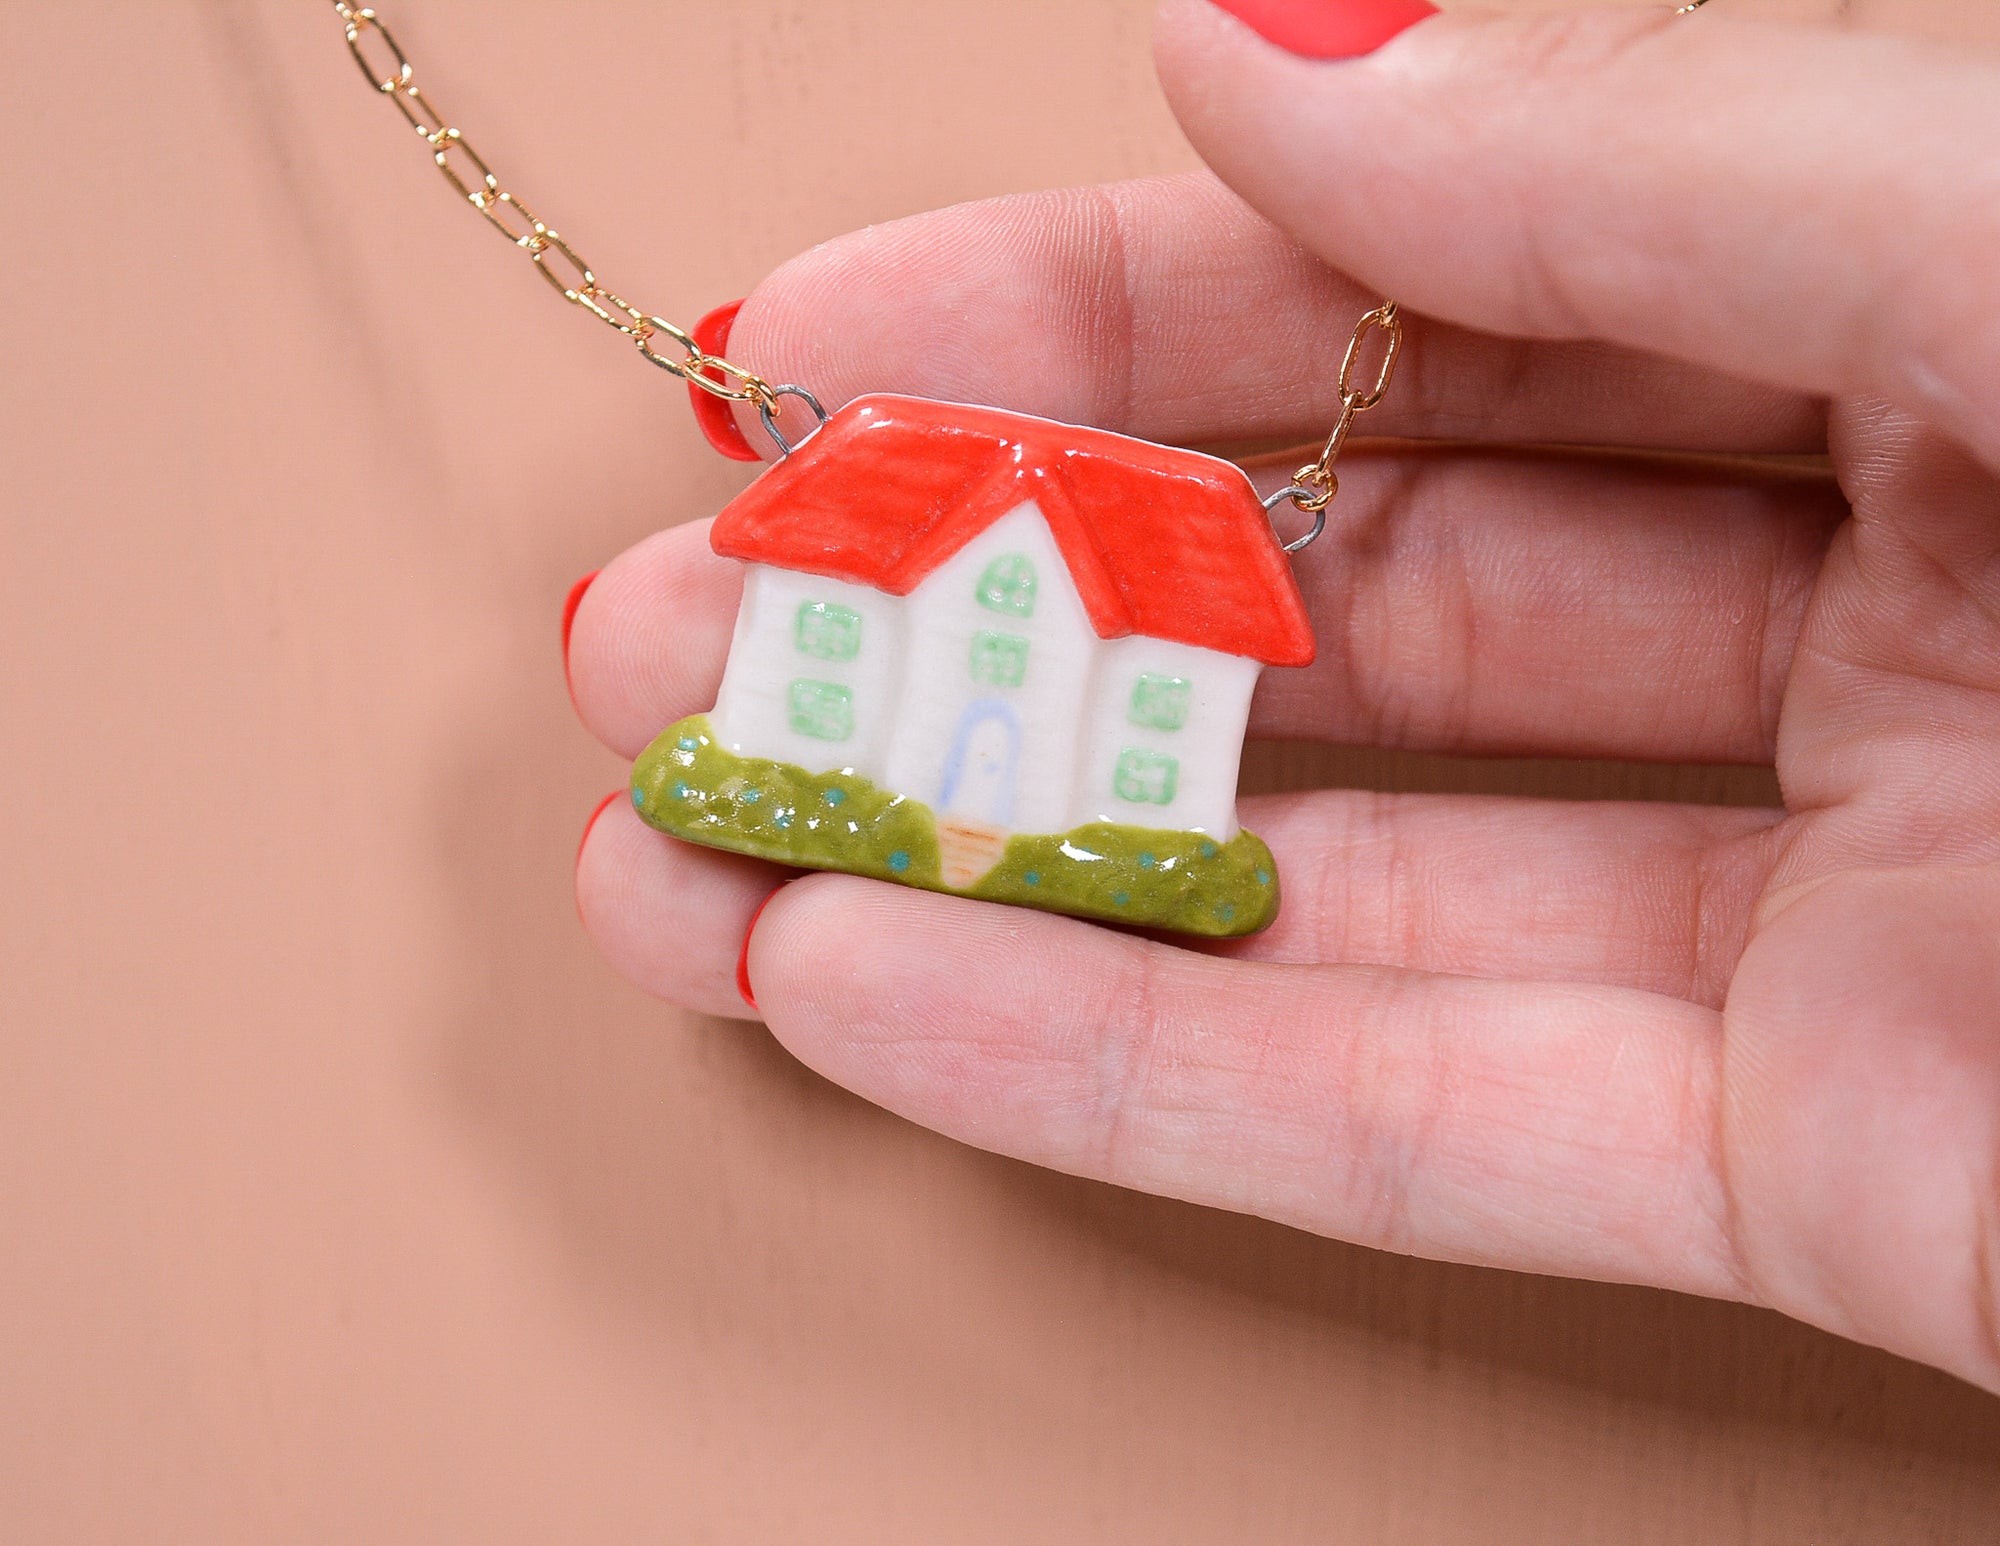 Red House Necklace